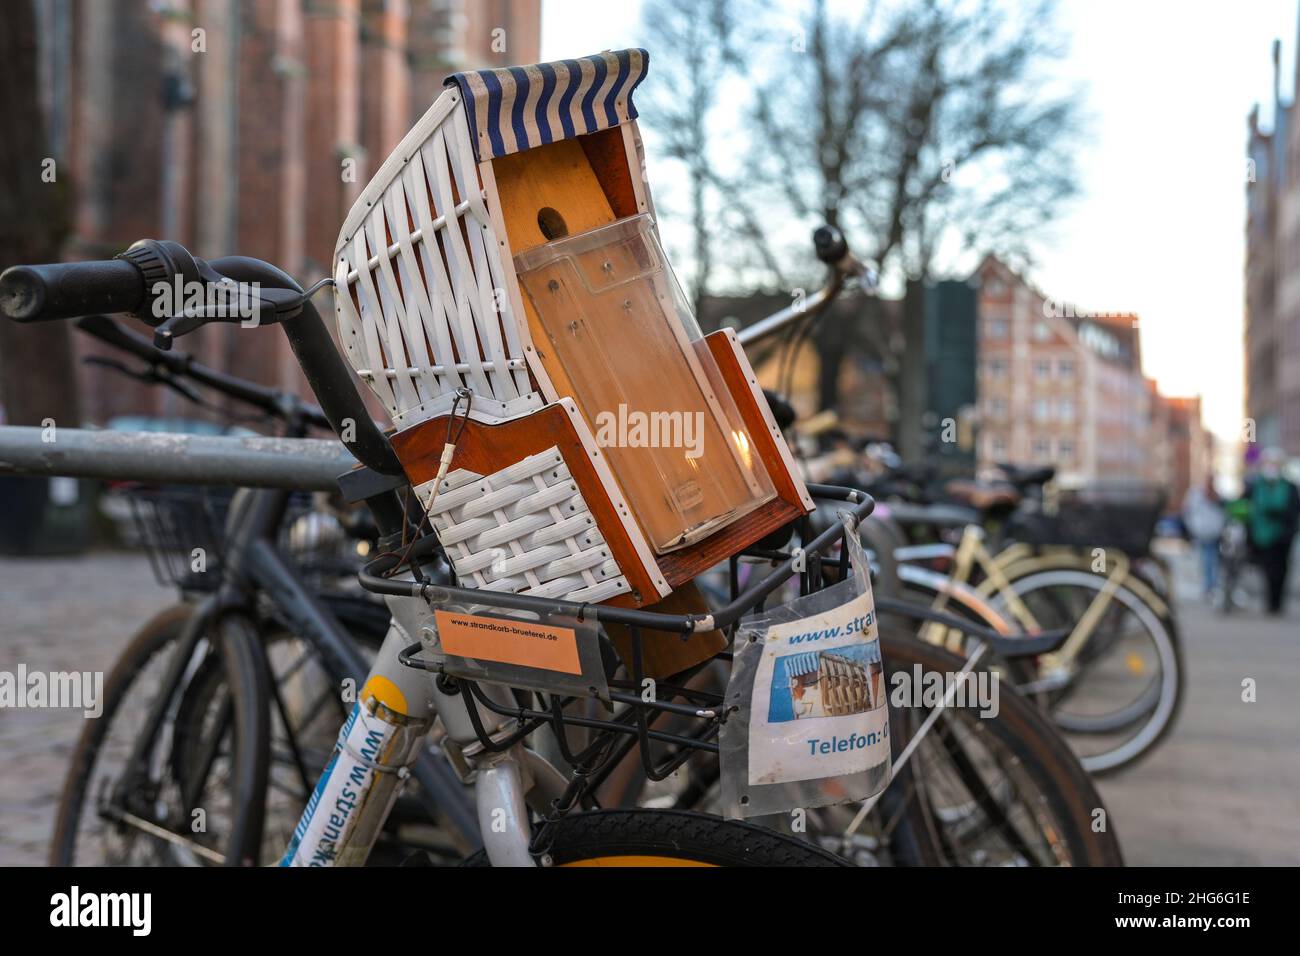 Lubeck, Germany, January 15, 2022: Bird nesting house in the shape of a typical north german beach basket chair with place for flyers, attached to a b Stock Photo